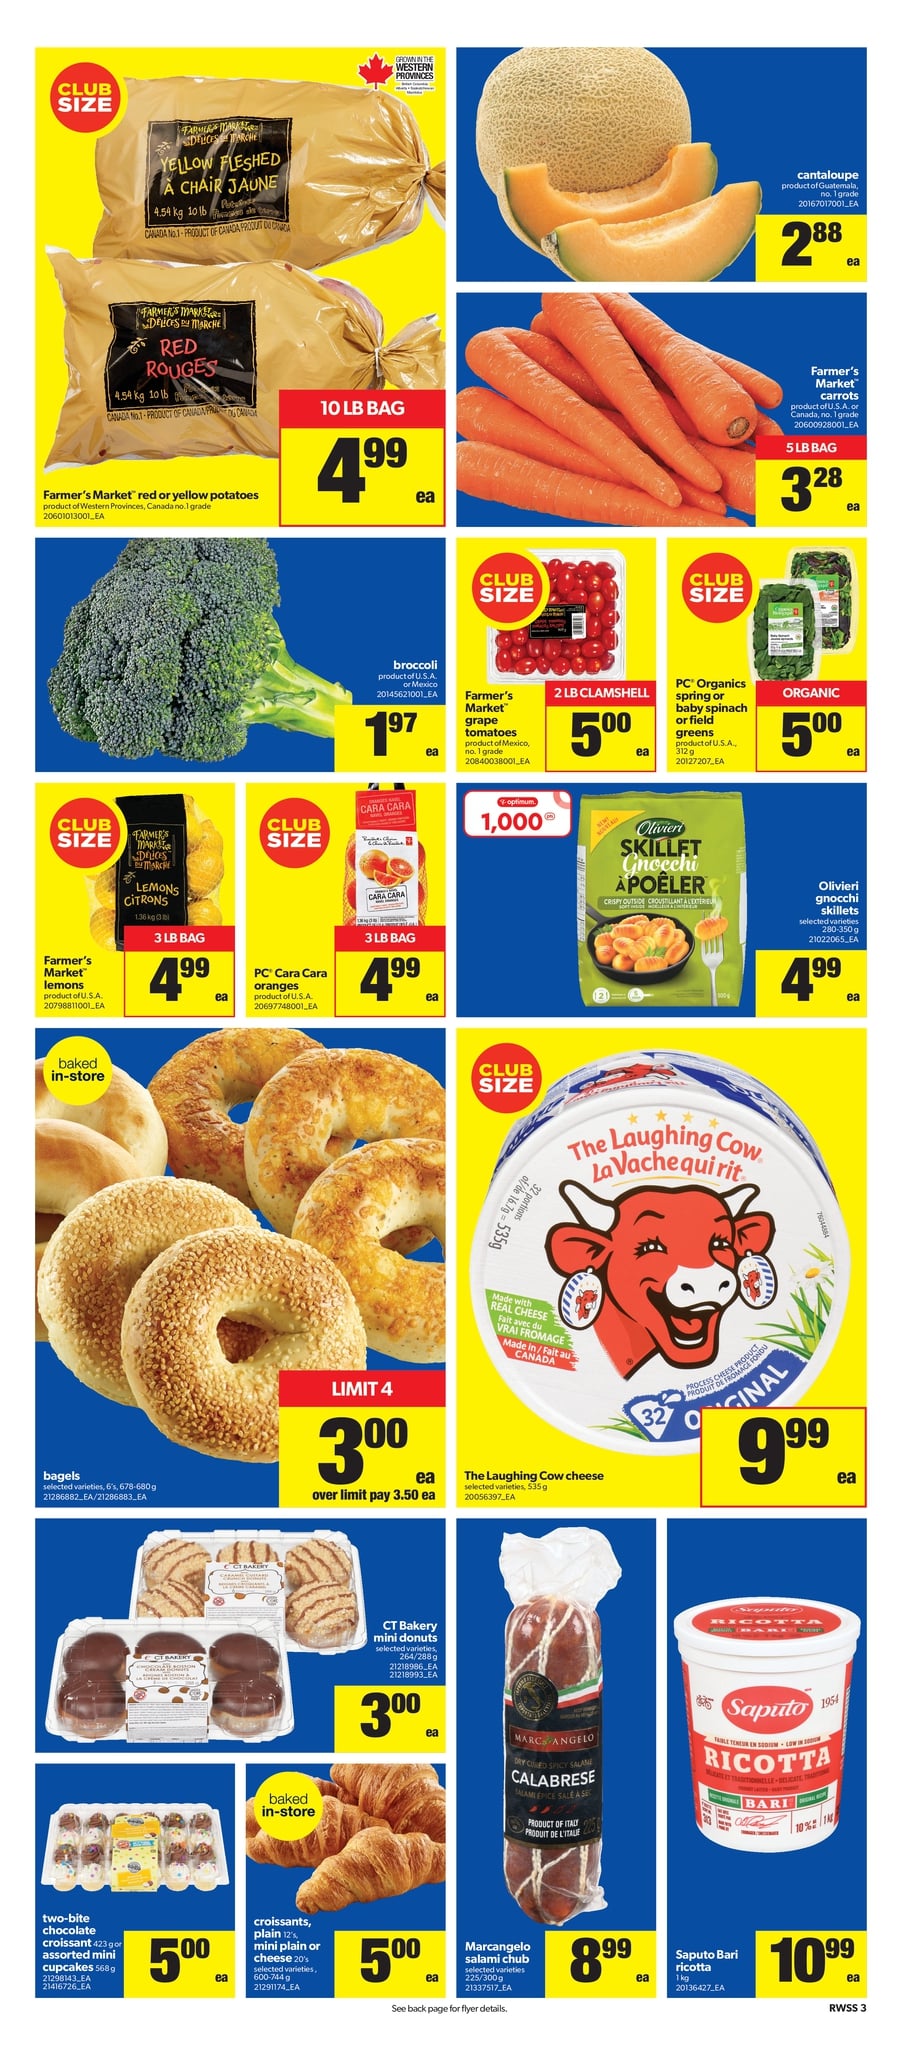 Real Canadian Superstore Western Canada - Weekly Flyer Specials - Page 4